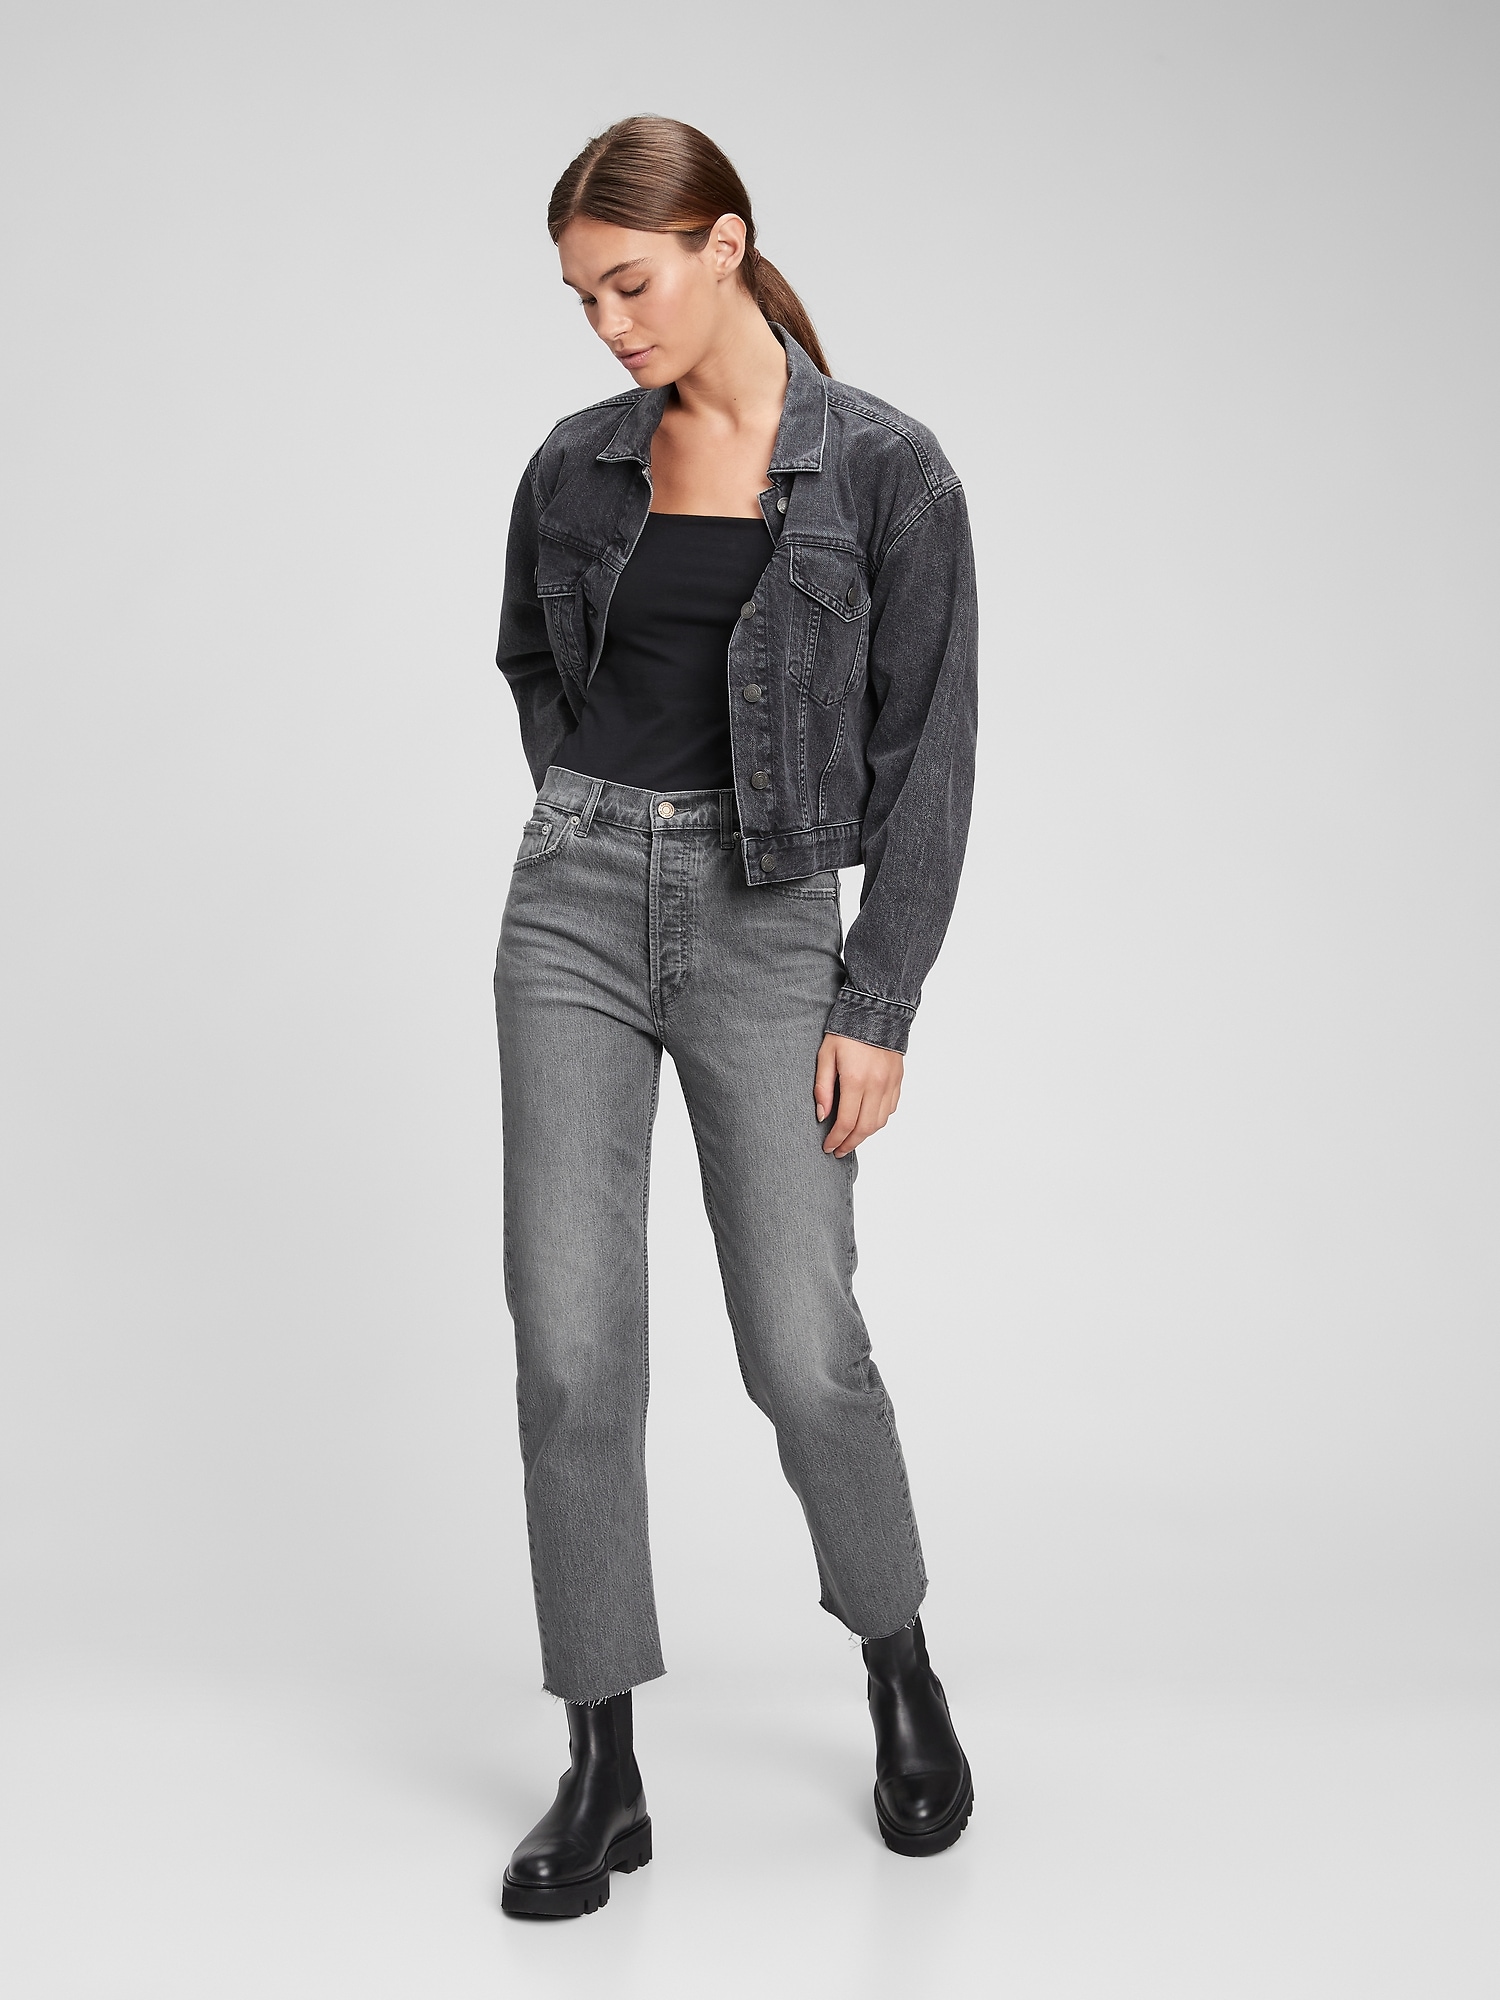 Gap High Rise Cheeky Straight Jeans with Washwell